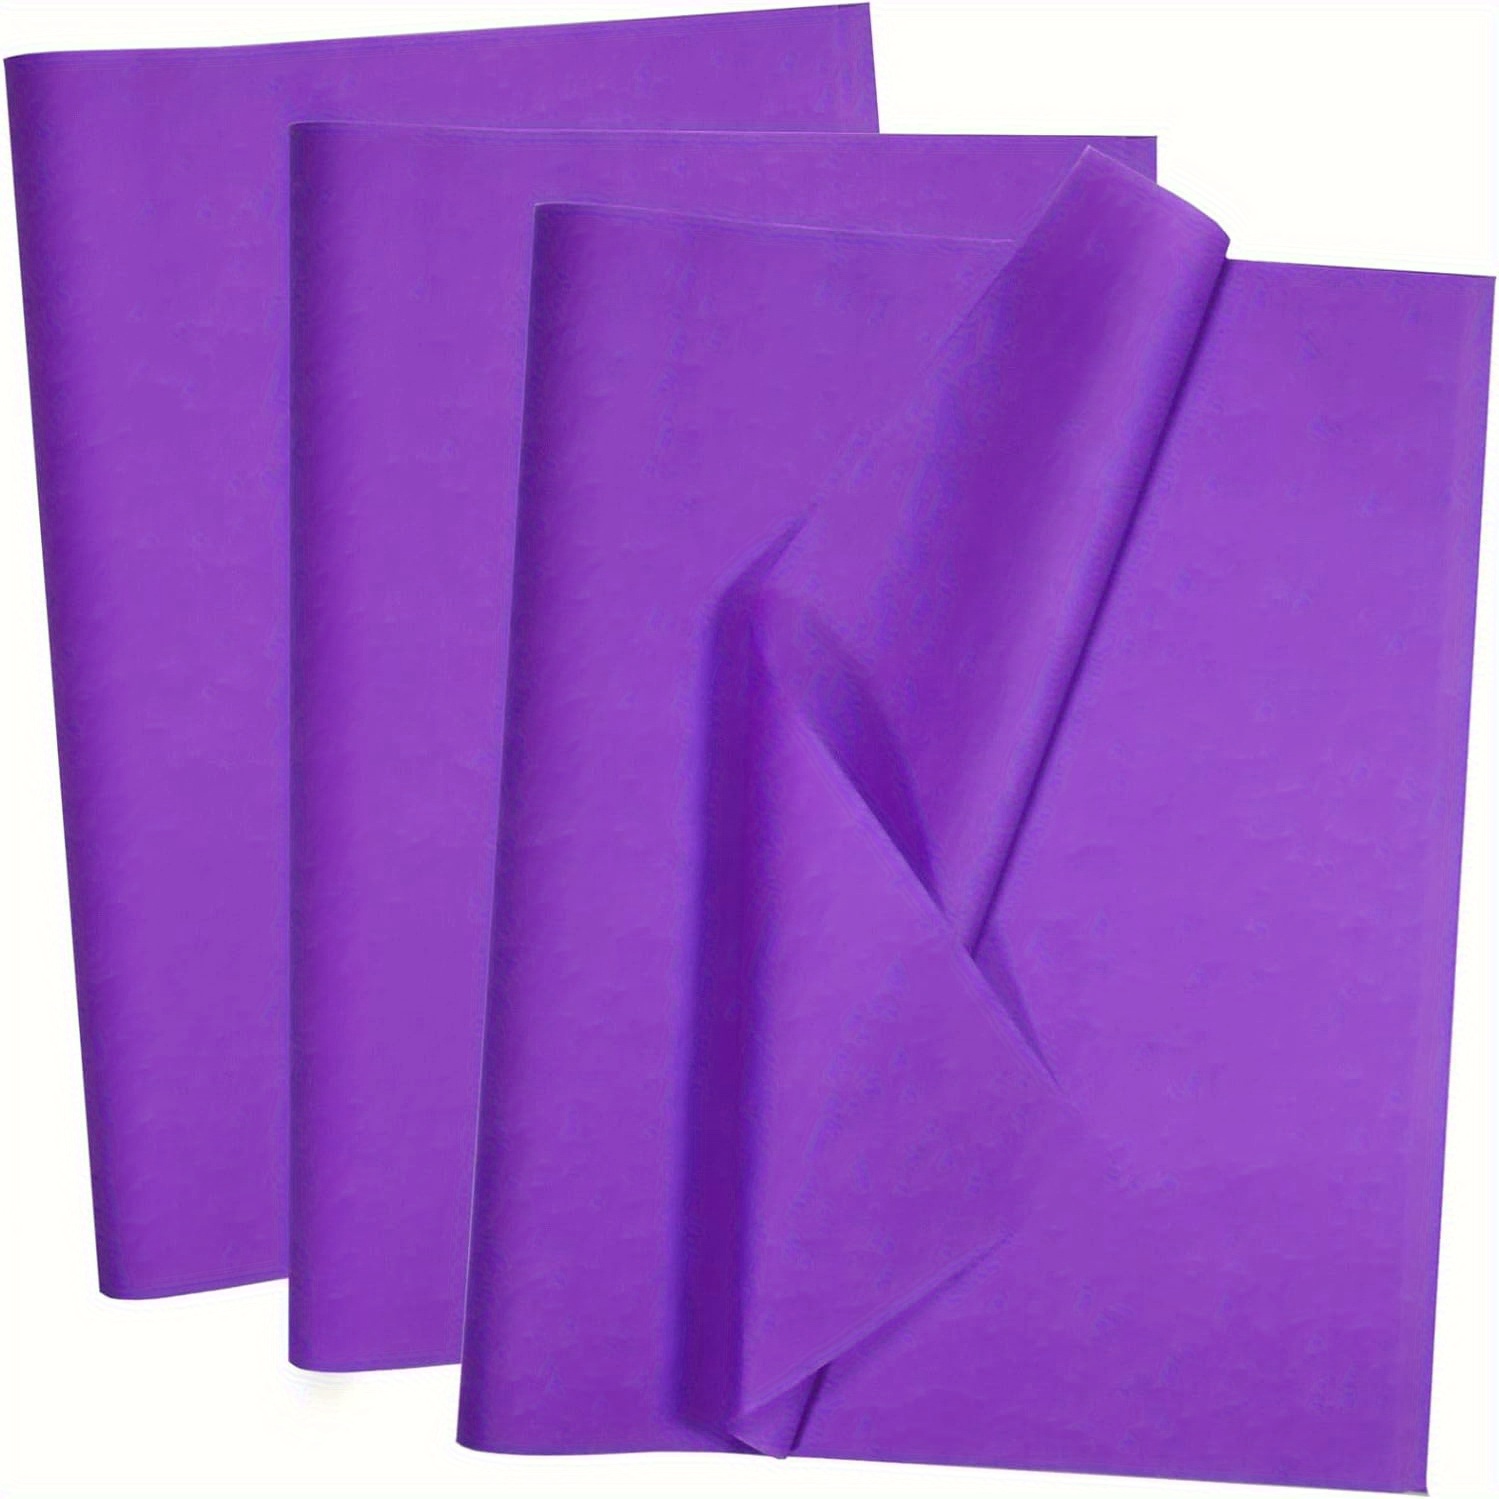 Tissue Wrapping Paper in Different Colors